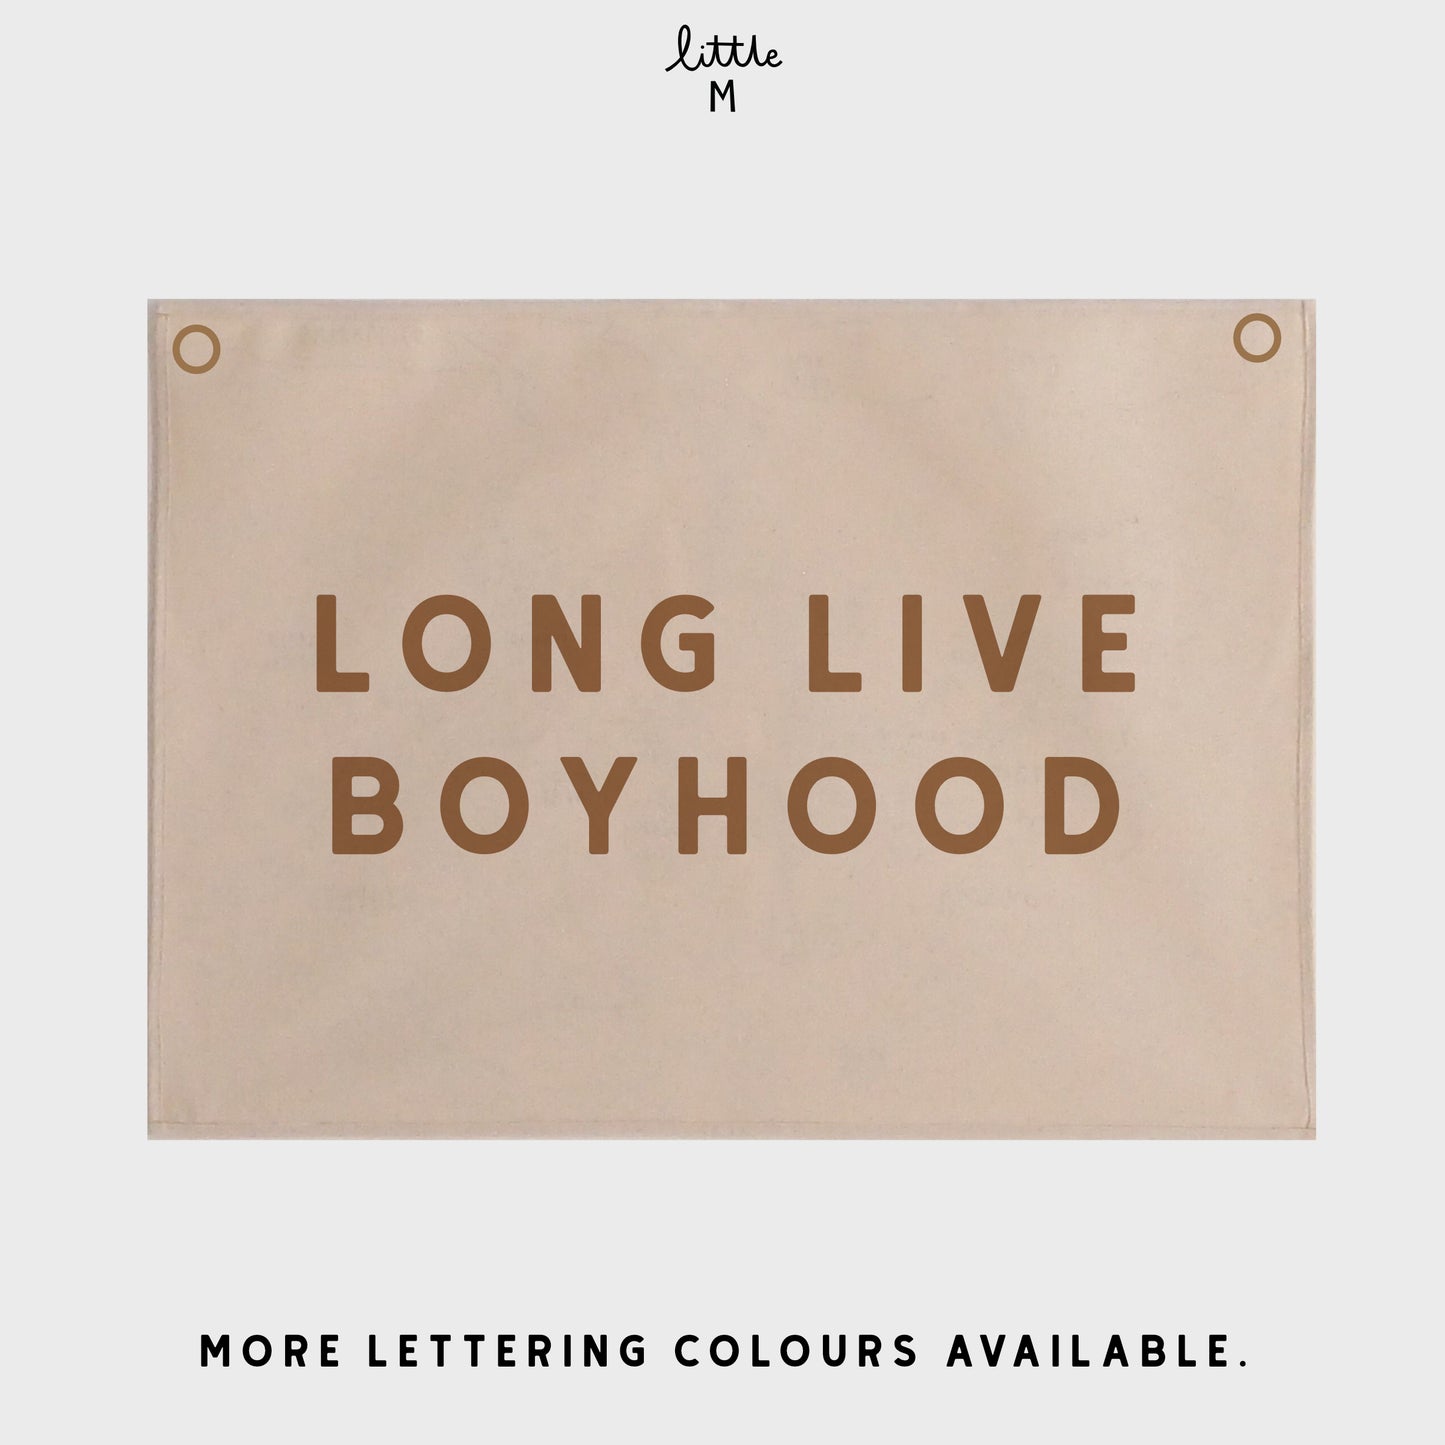 Long Live Boyhood Bold Wall Hanging 50x70cm - more colours and layout options available.